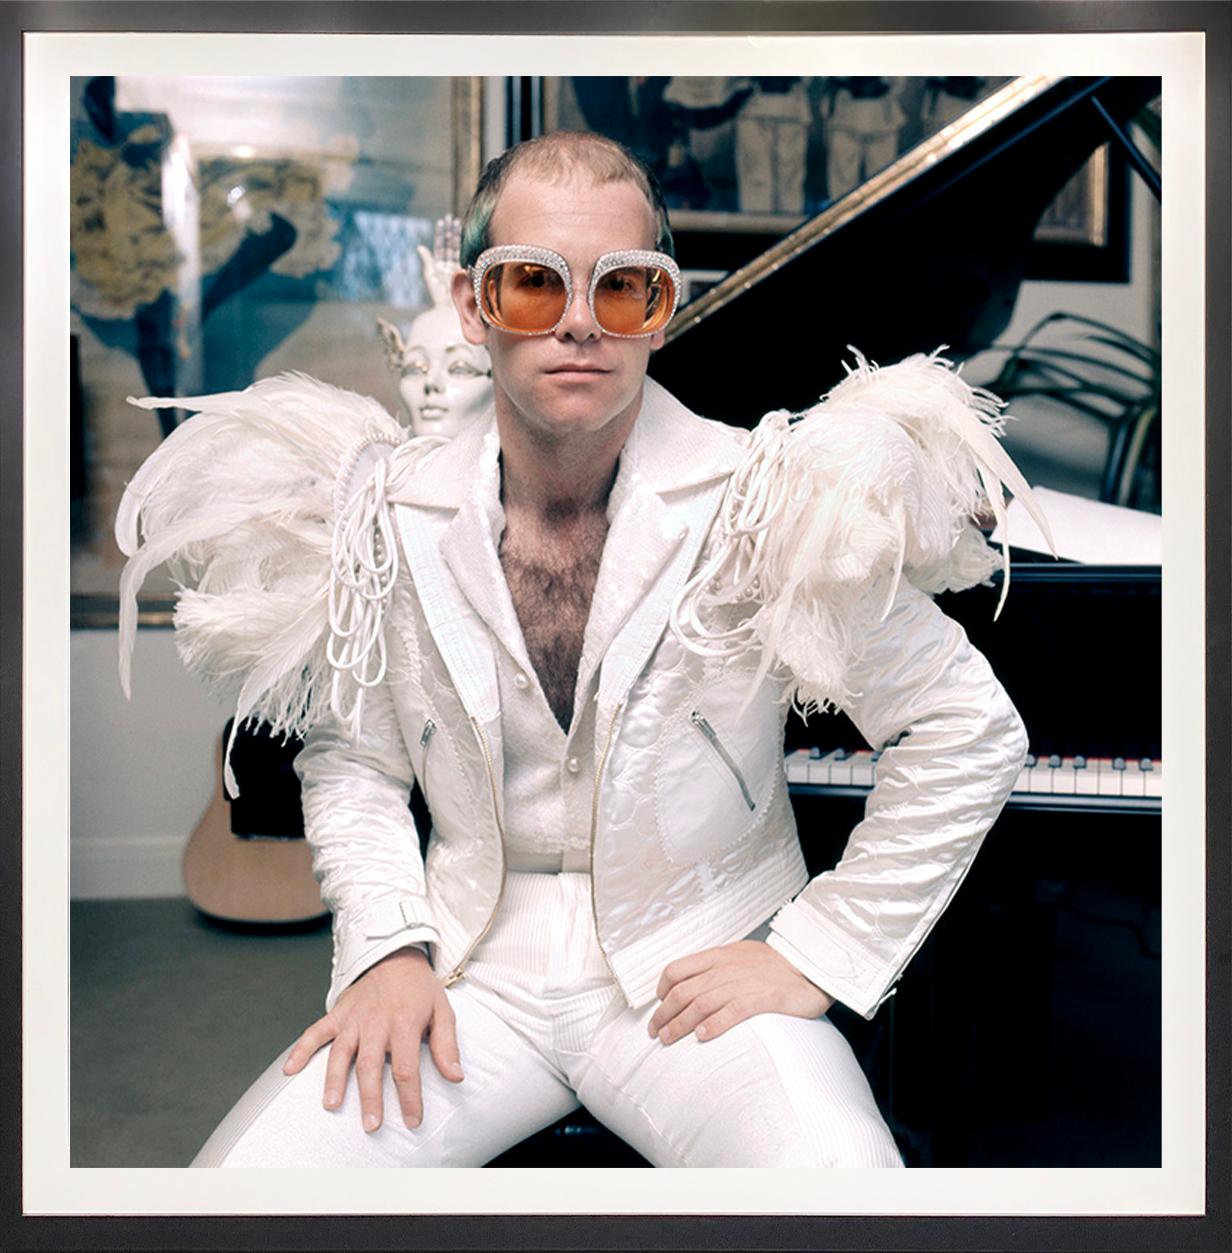 Edition =4 of 50
Digitally Printed Signature and Edition number on Front
Terry O'Neill - photographer / English singer and songwriter Elton John in 1973
